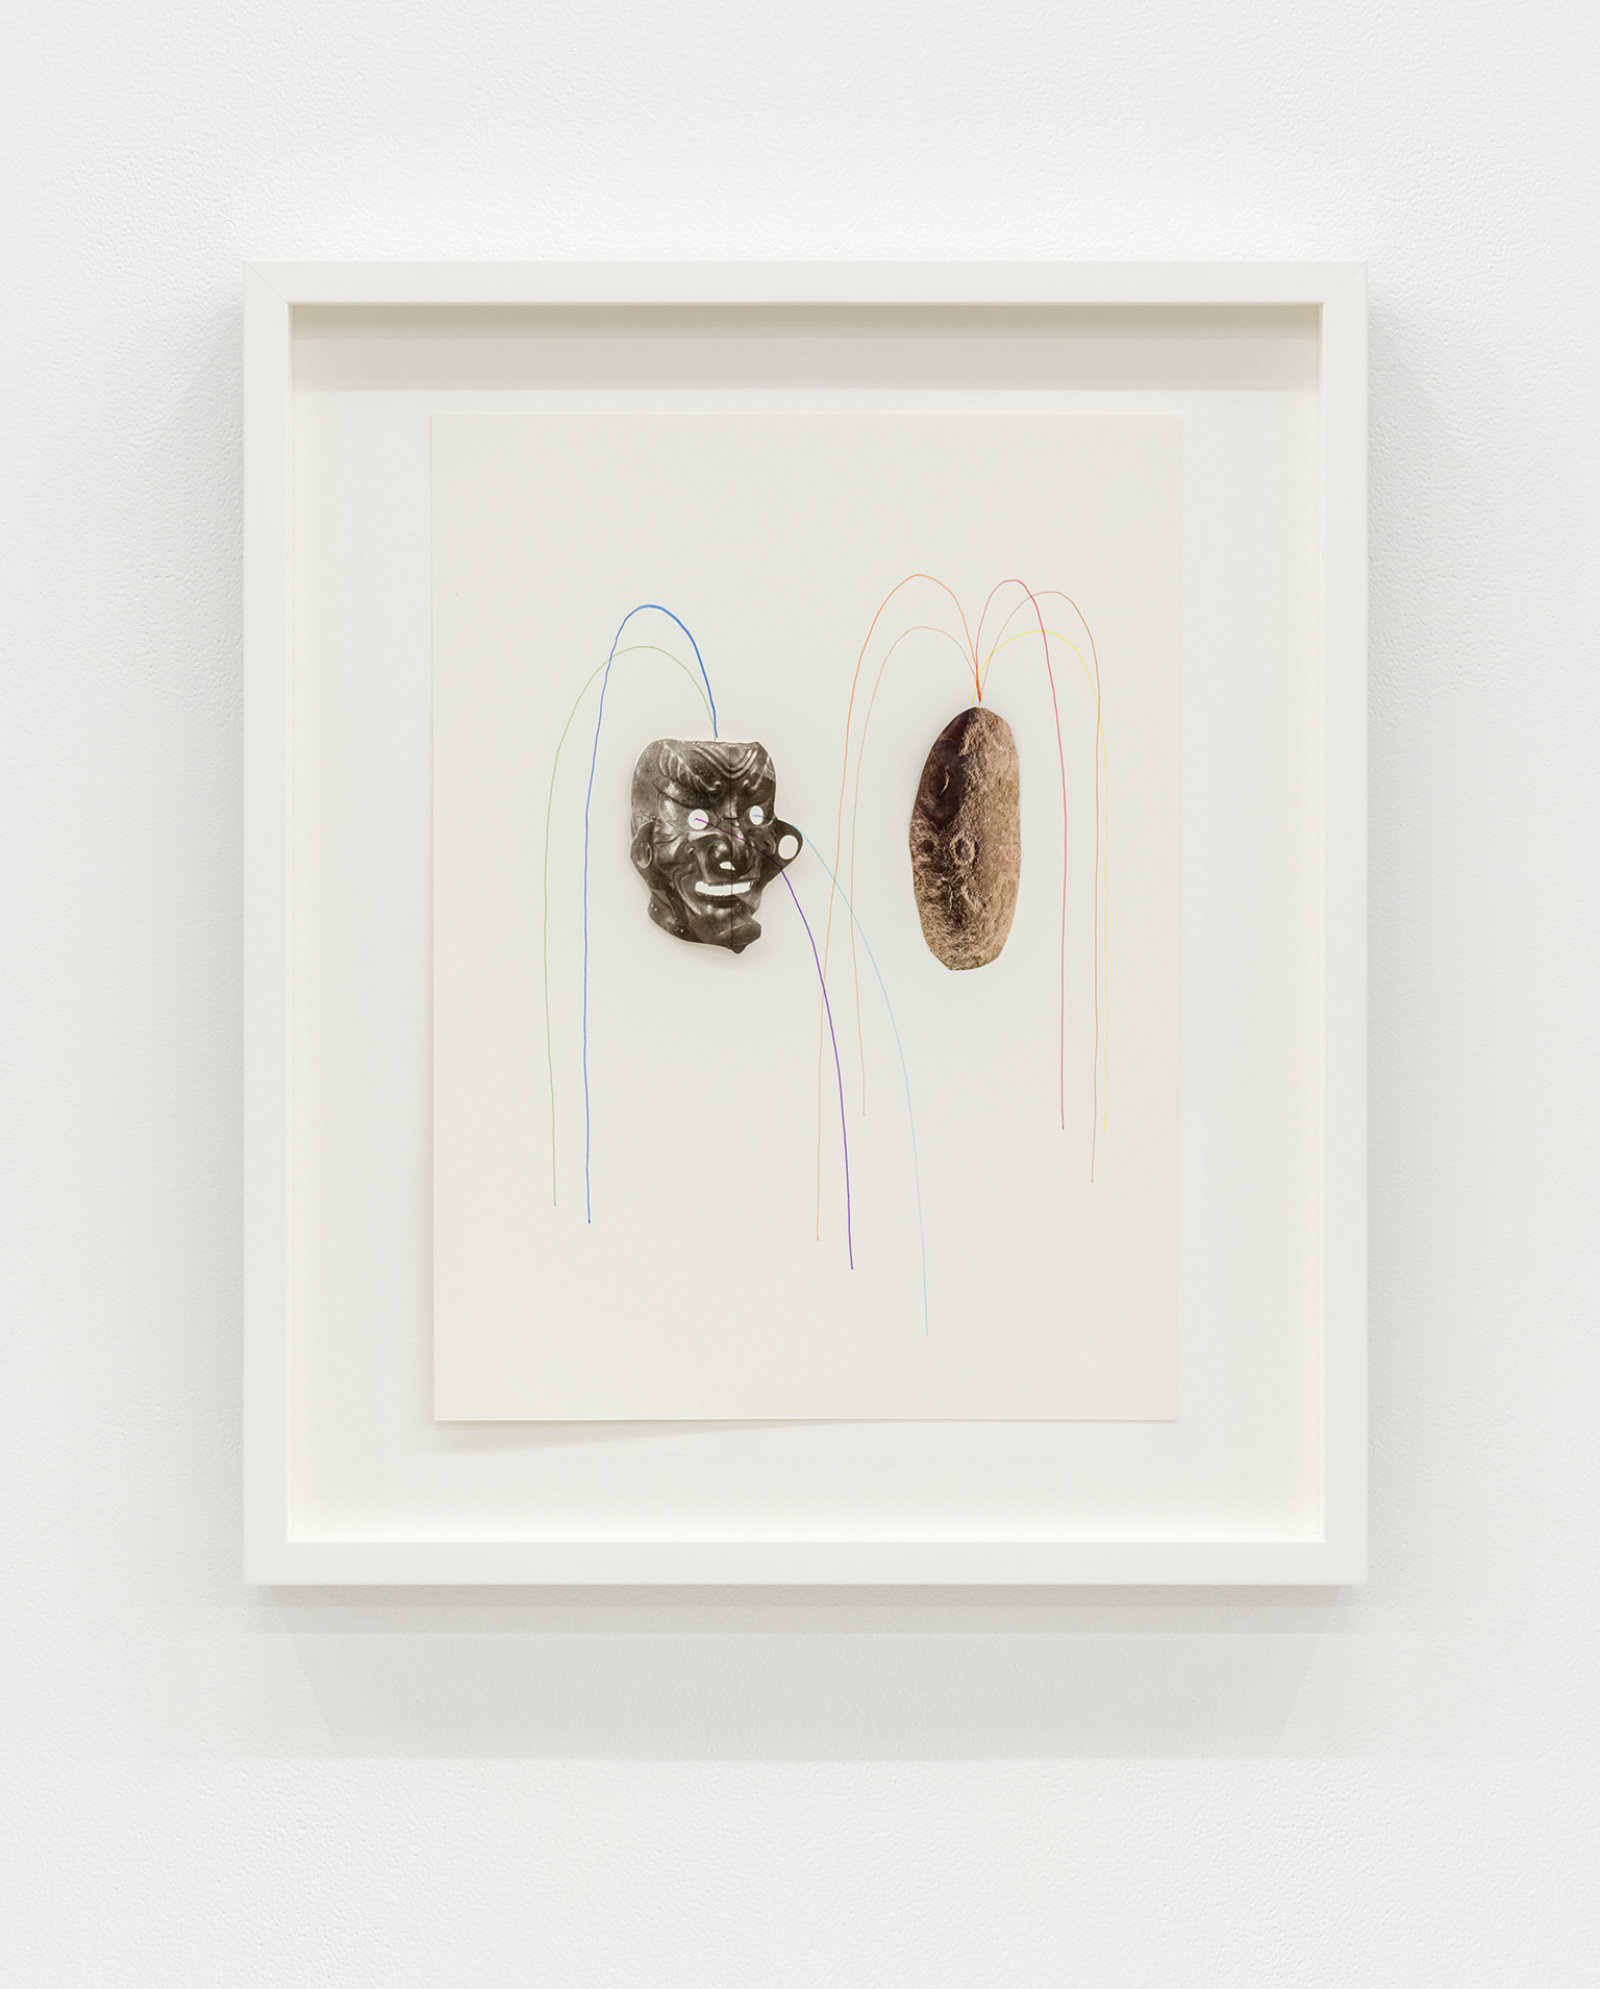 Geoffrey Farmer, Looking at a photograph of myself and realizing I had a potato instead of a head (Fountain) (detail), 2014, vitrine with cut-outs mounted on 5 vertical clay slabs, 4 wooden wall brick façades, paint, sandbags, framed cut-outs and ink mounted on paper, dimensions variable